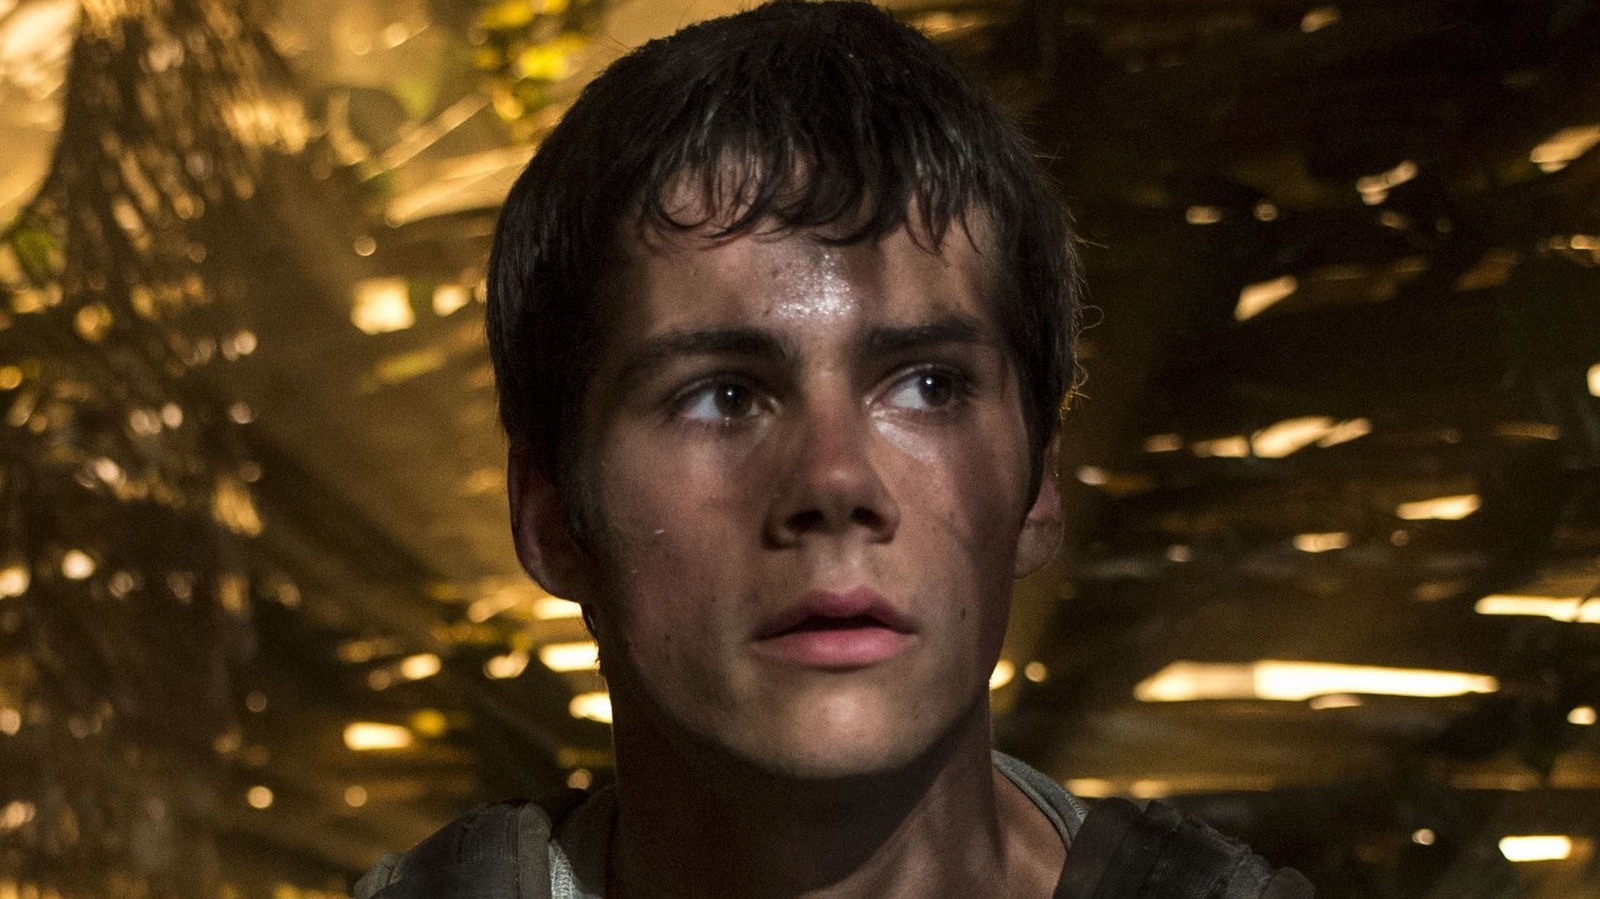 10 Big Differences Between The Maze Runner Book And Movie